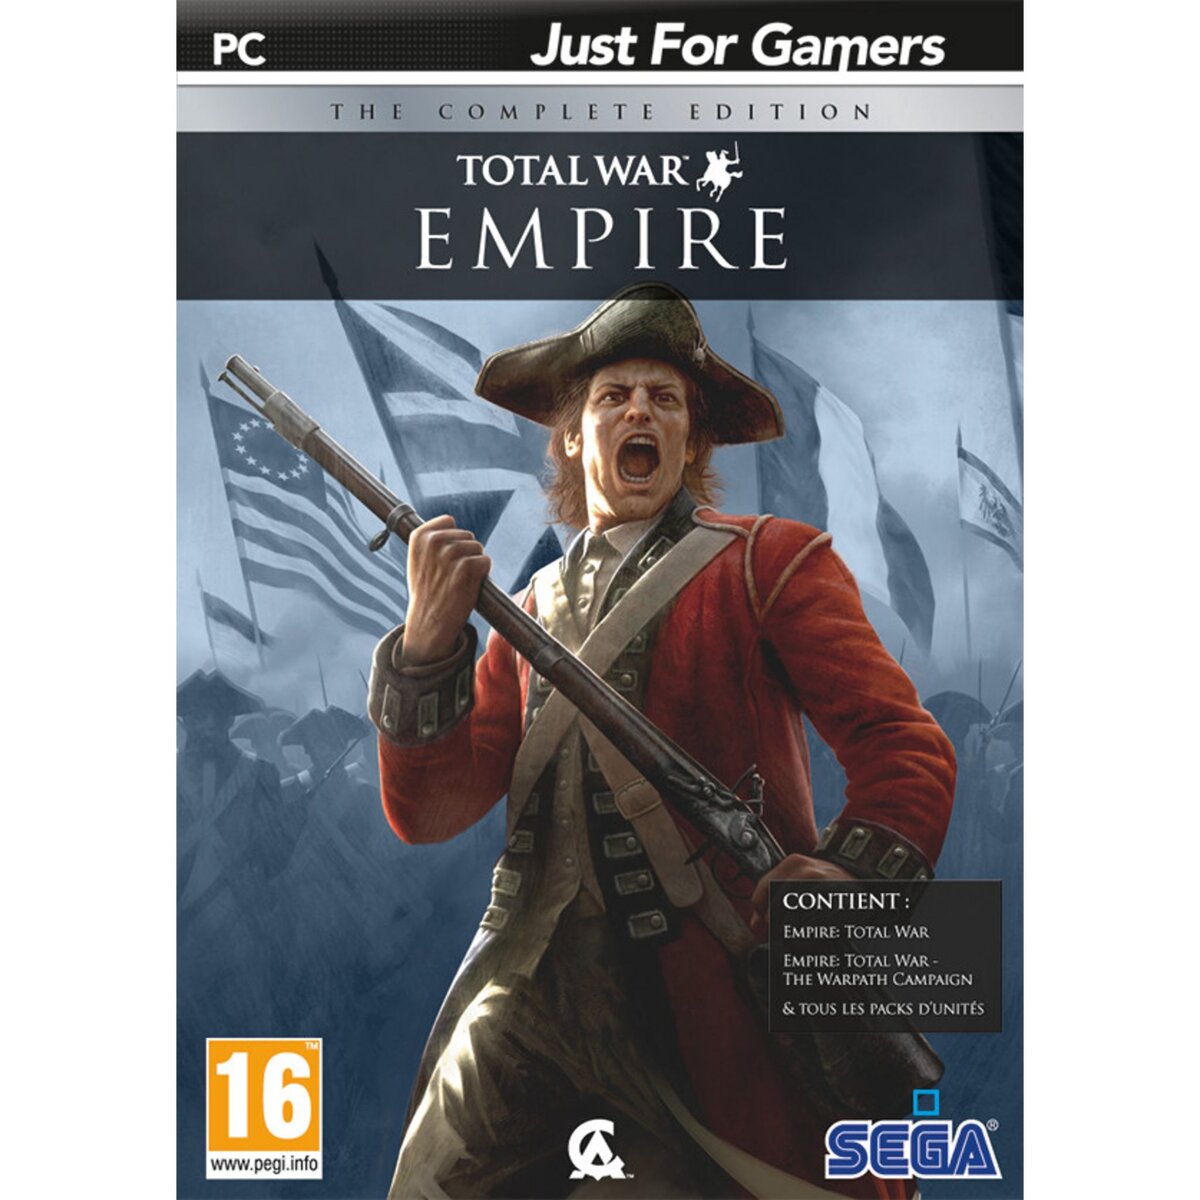 Empire : Total War - Complete Edition PC